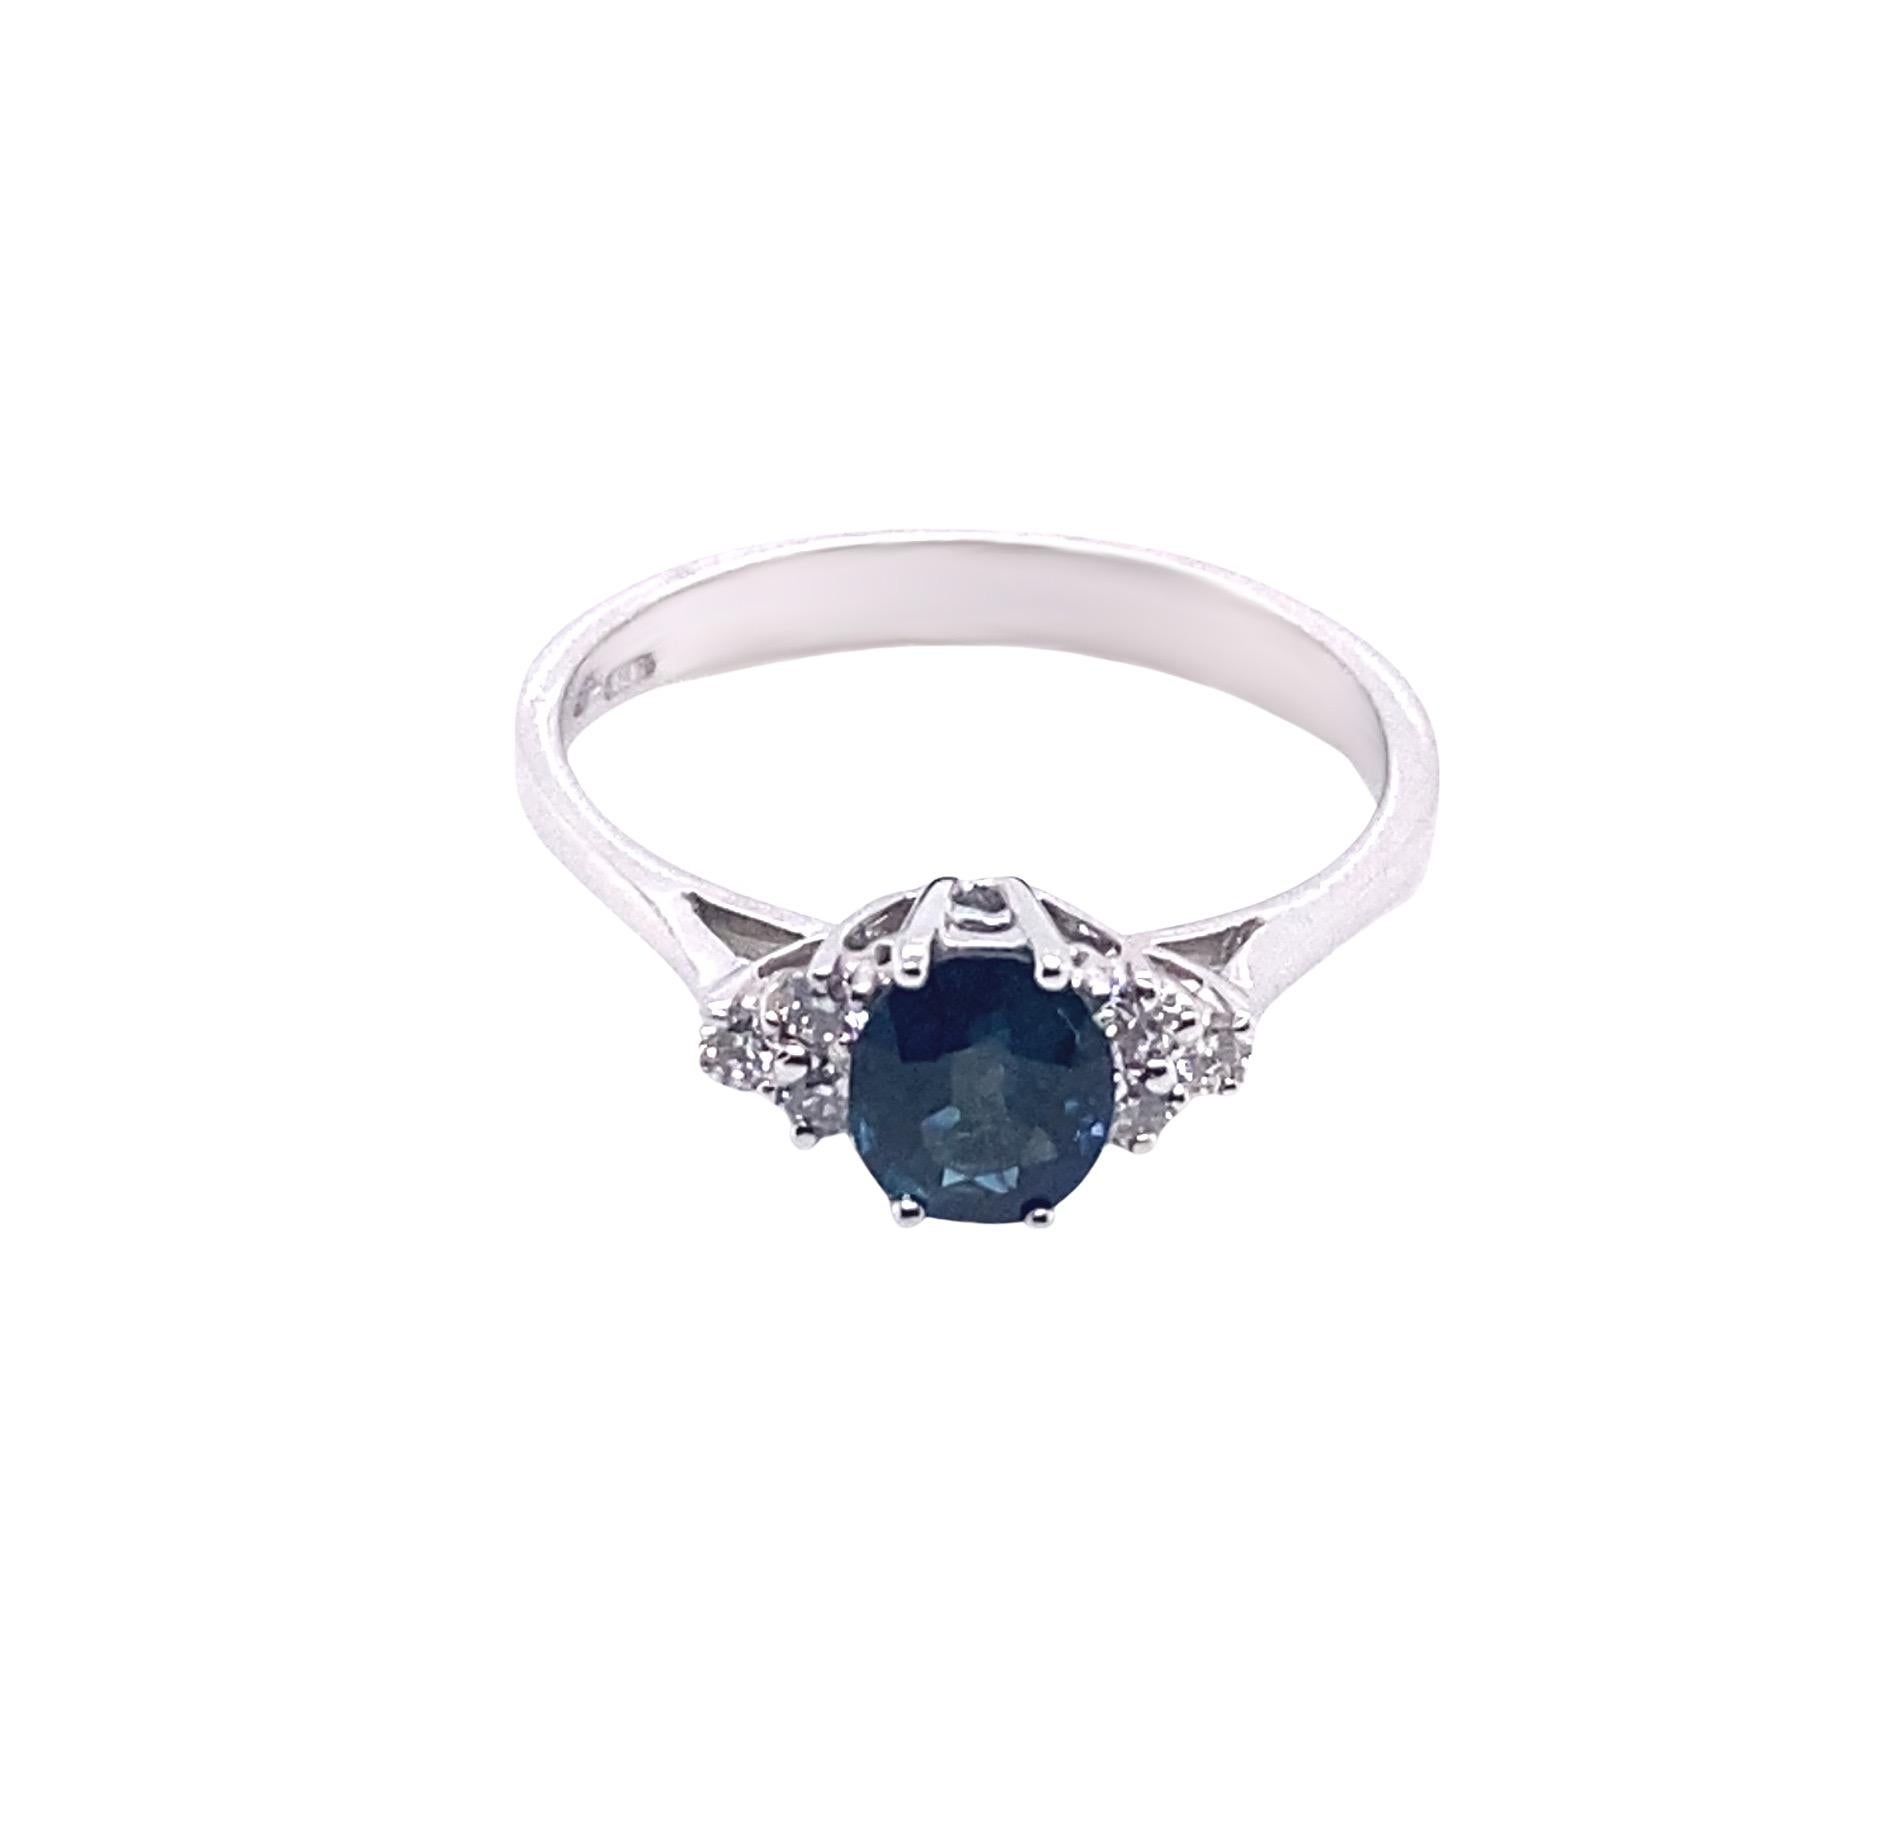 Contemporary 21st Century Exquisite 18K White Gold Sapphire and Diamond Cluster Ring For Sale